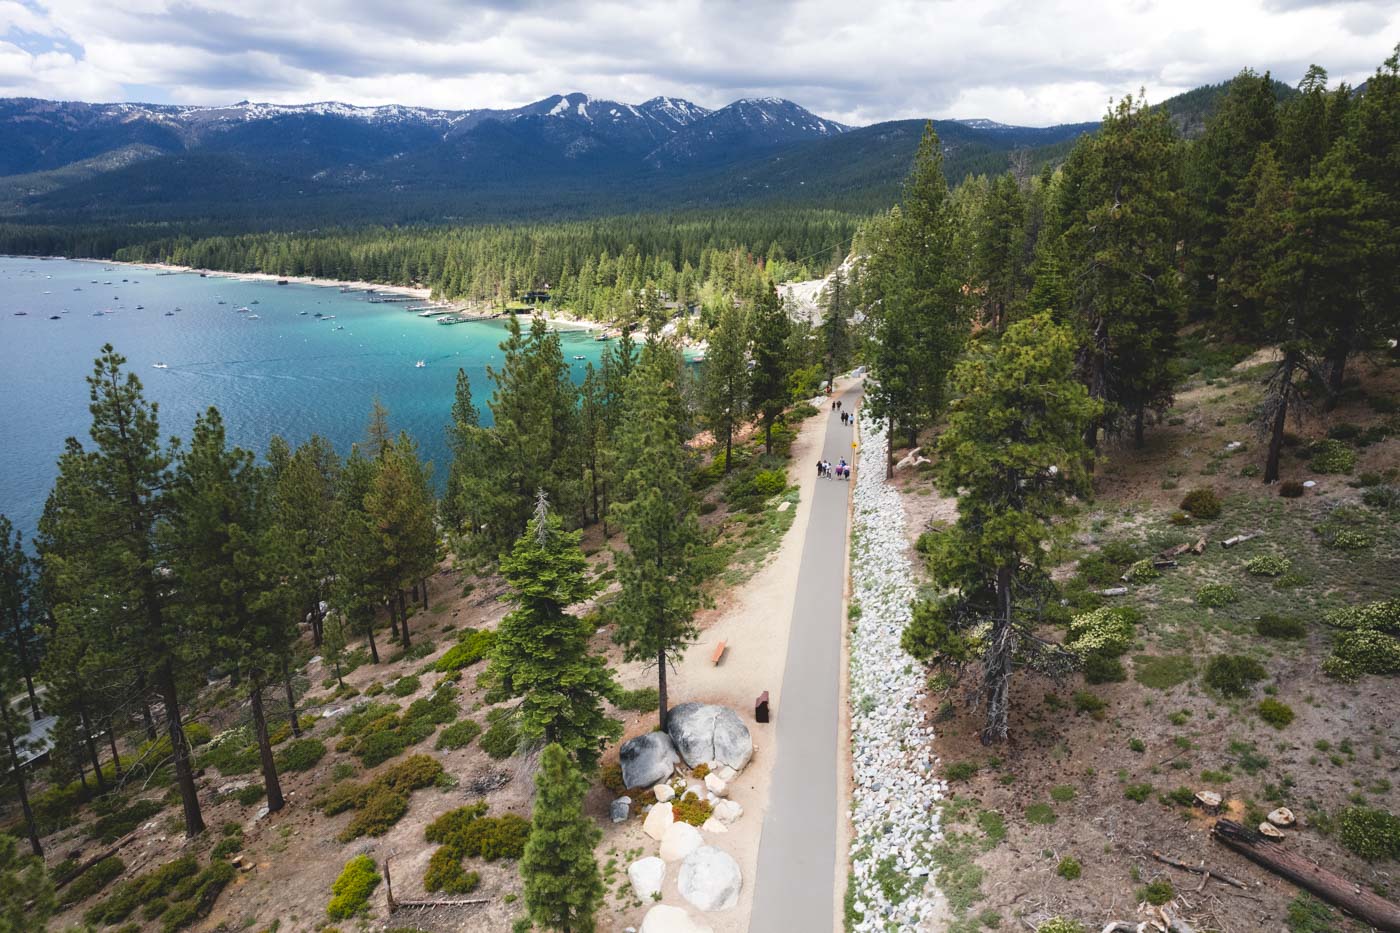 Aerial view overlooking the Tahoe East Shore Trail as people walk along the paved pathway between trees with a view of Lake Tahoe to the left.